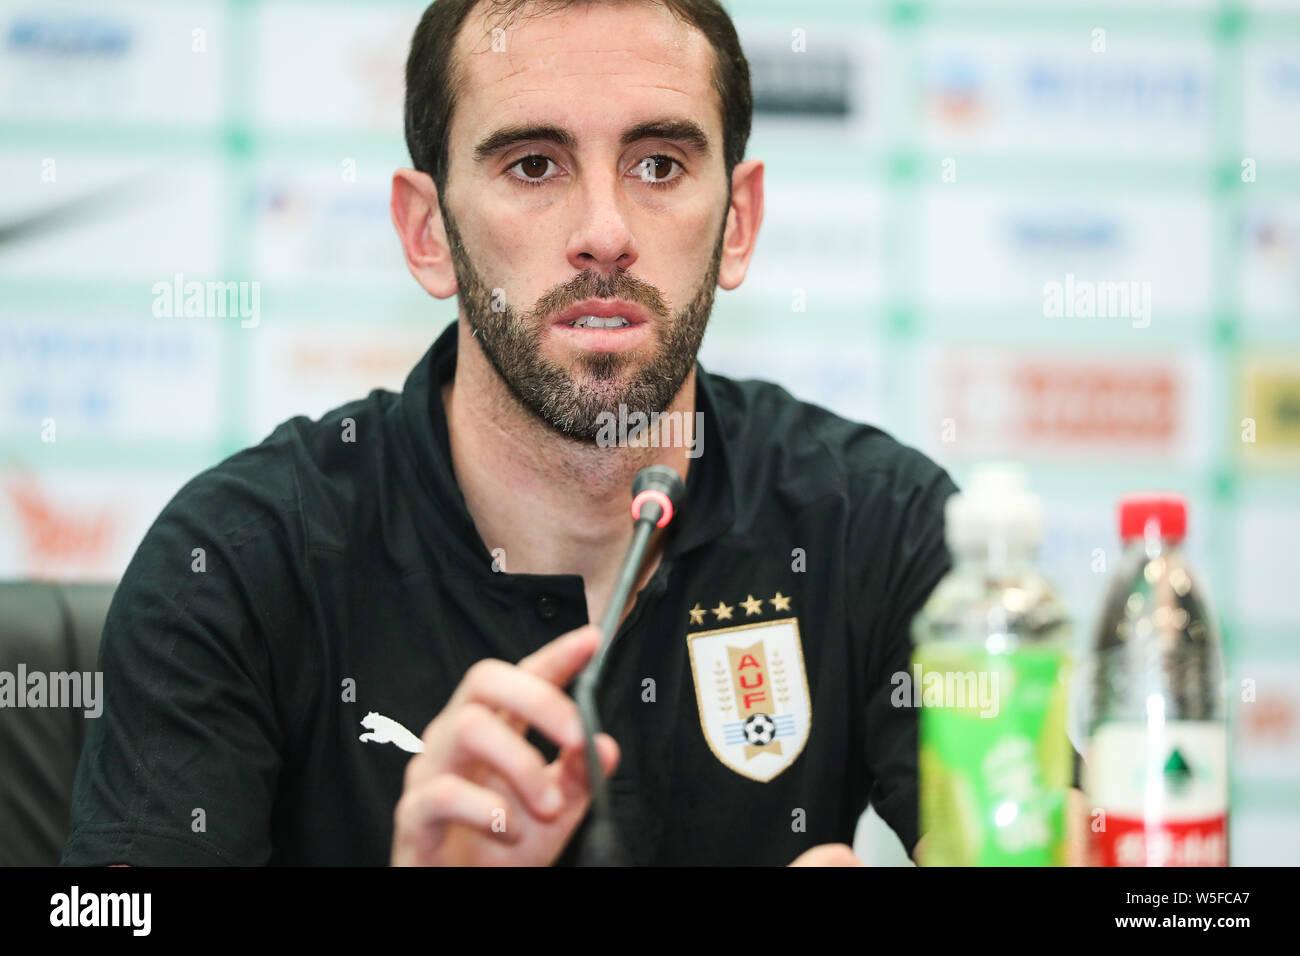 Diego Godin of Uruguay national football team attends a press conference for 2019 Gree China Cup International Football Championship against Uzbekista Stock Photo